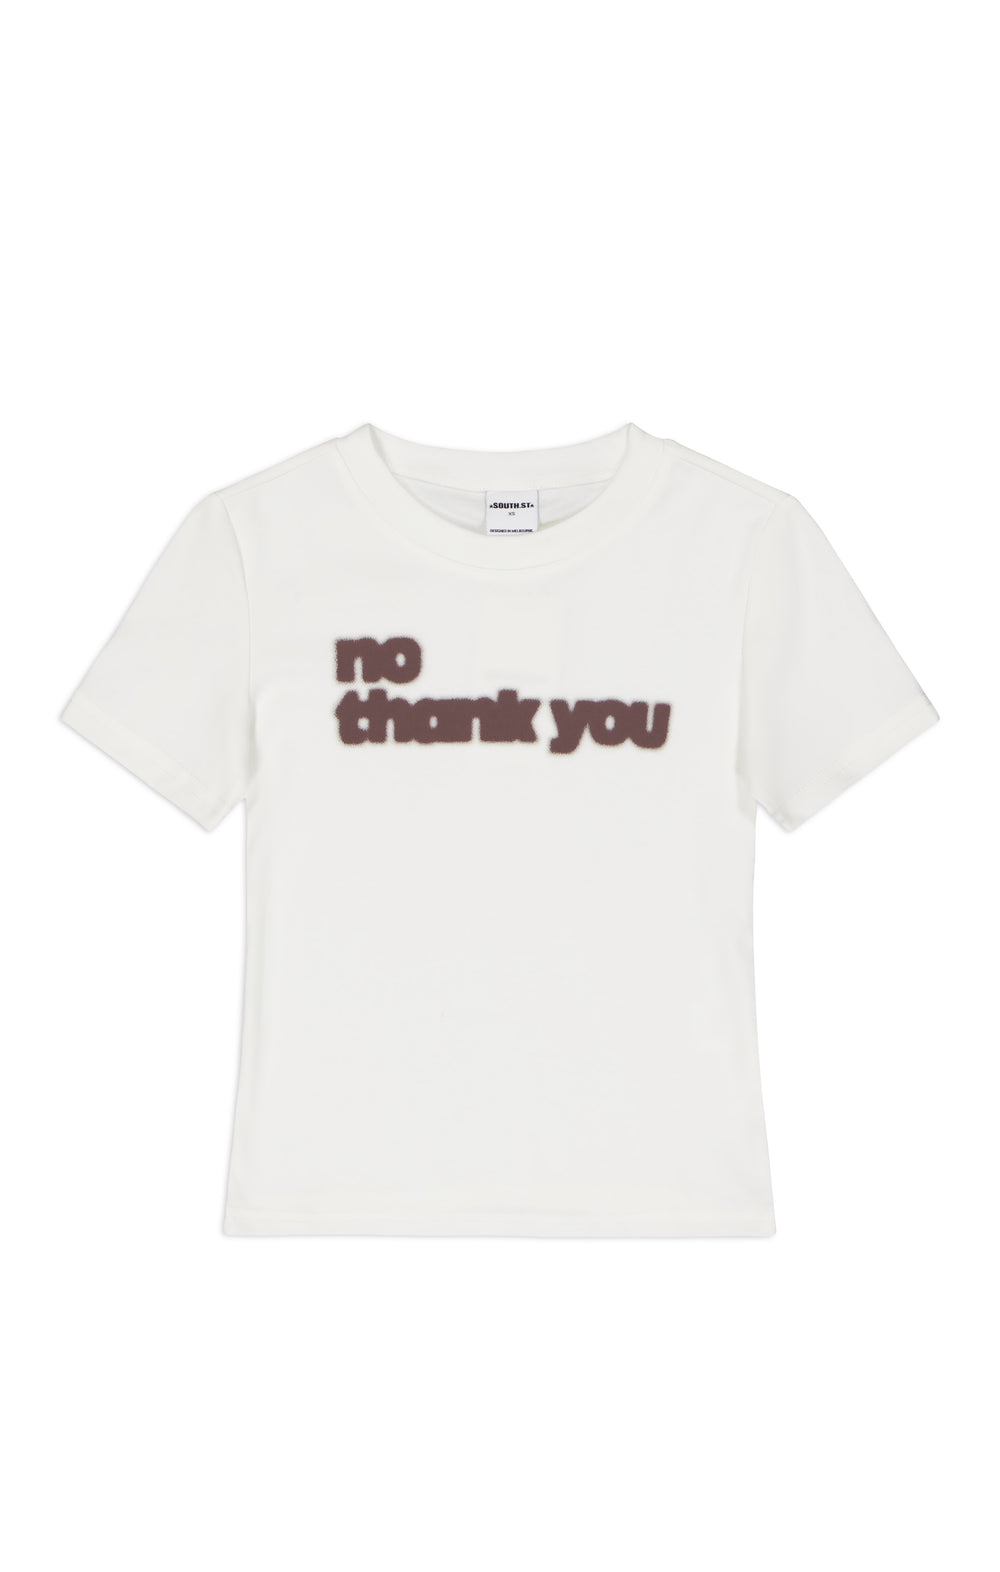 MANNERS BABY TEE - White/Brown